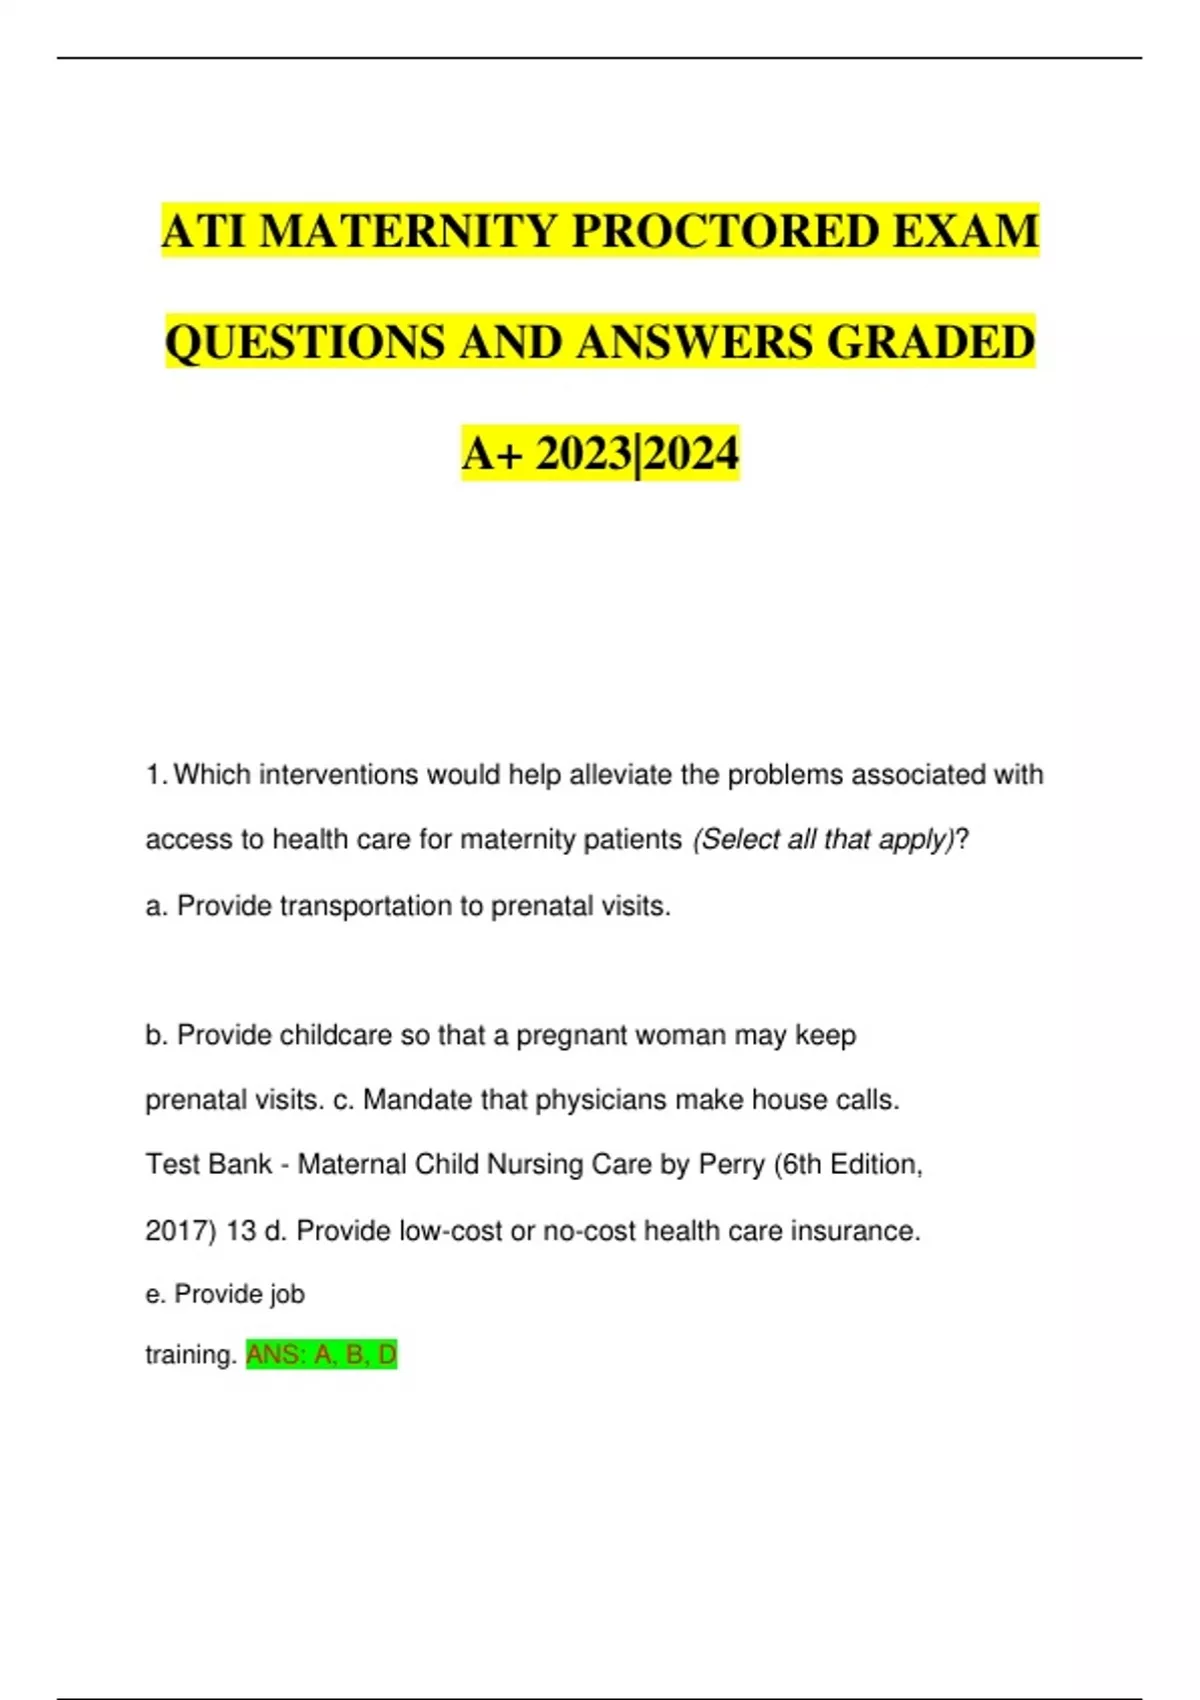 ATI MATERNITY PROCTORED EXAM QUESTIONS AND ANSWERS GRADED A+ 20232024